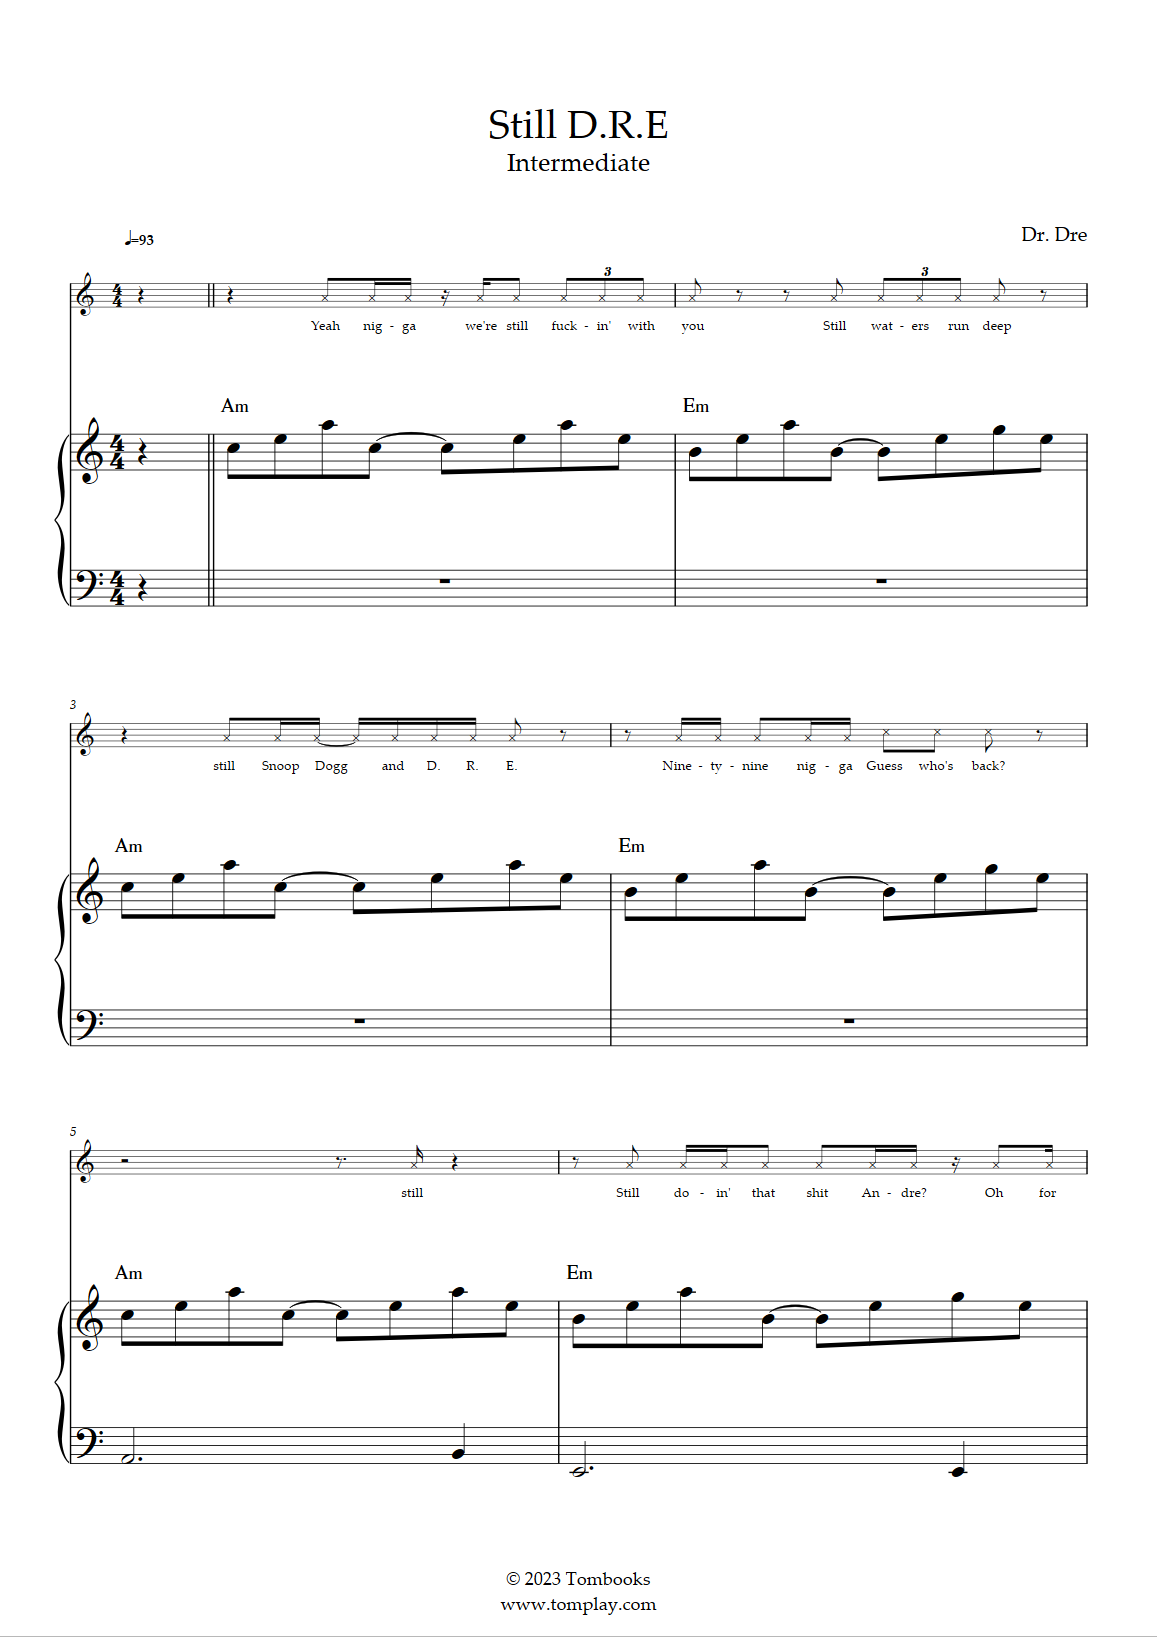 Still . (Intermediate Level, with Orchestra) (Dr. Dre) - Piano Sheet  Music